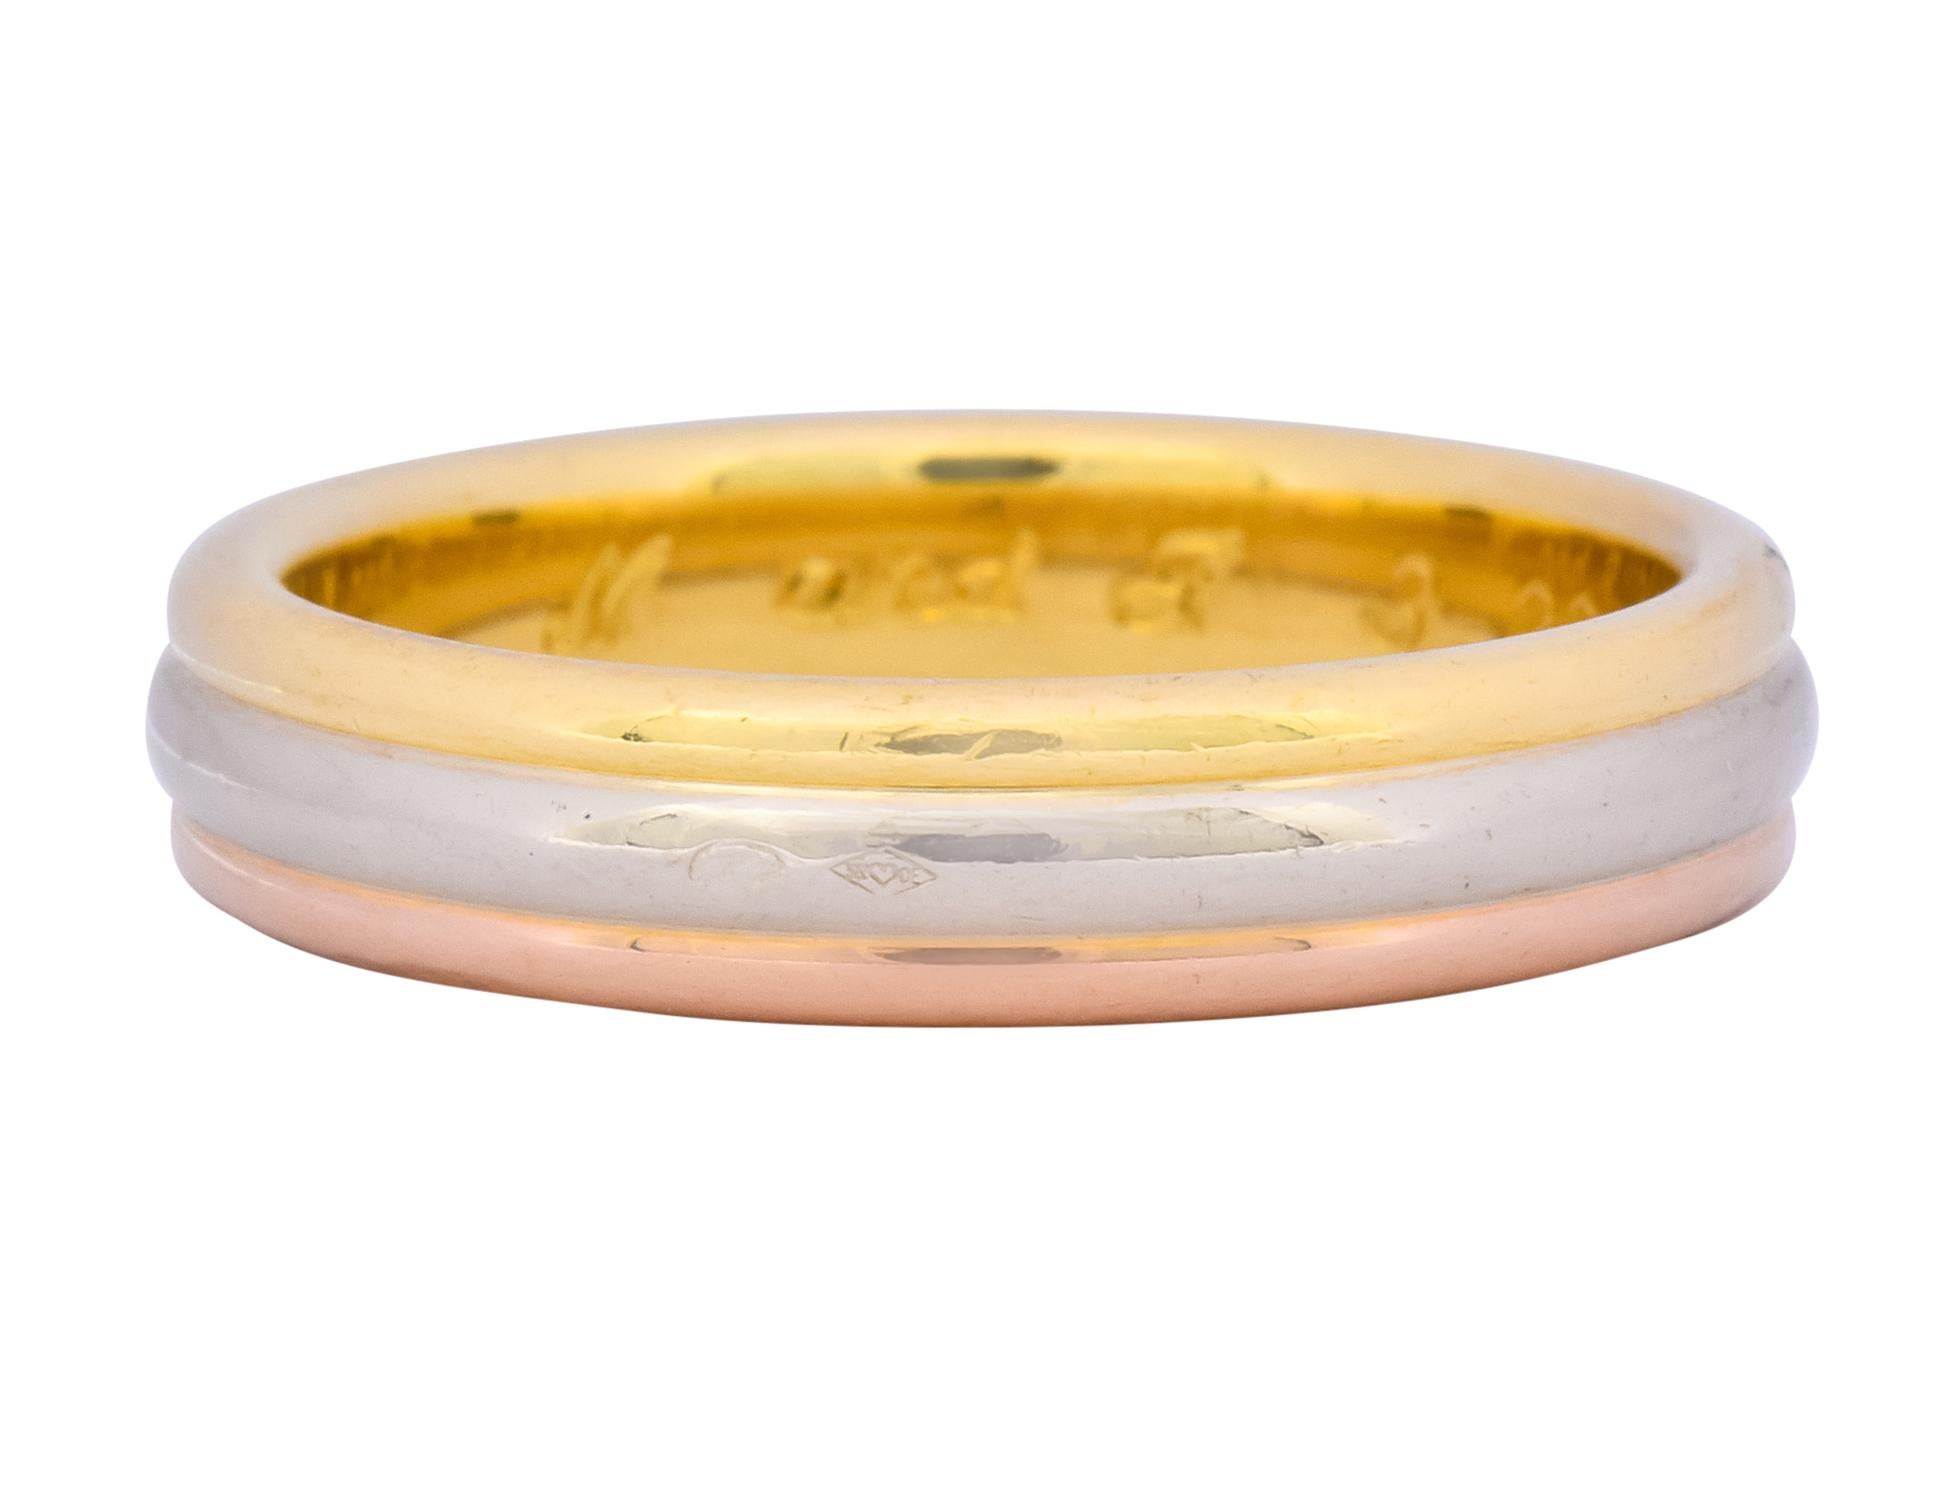 Wide band style ring comprised of three horizontal sections of yellow, white, and rose gold

With a high polished finish and rounded curvature for each section

Inner band with dated inscription

From the Trinity collection

Fully signed Cartier and